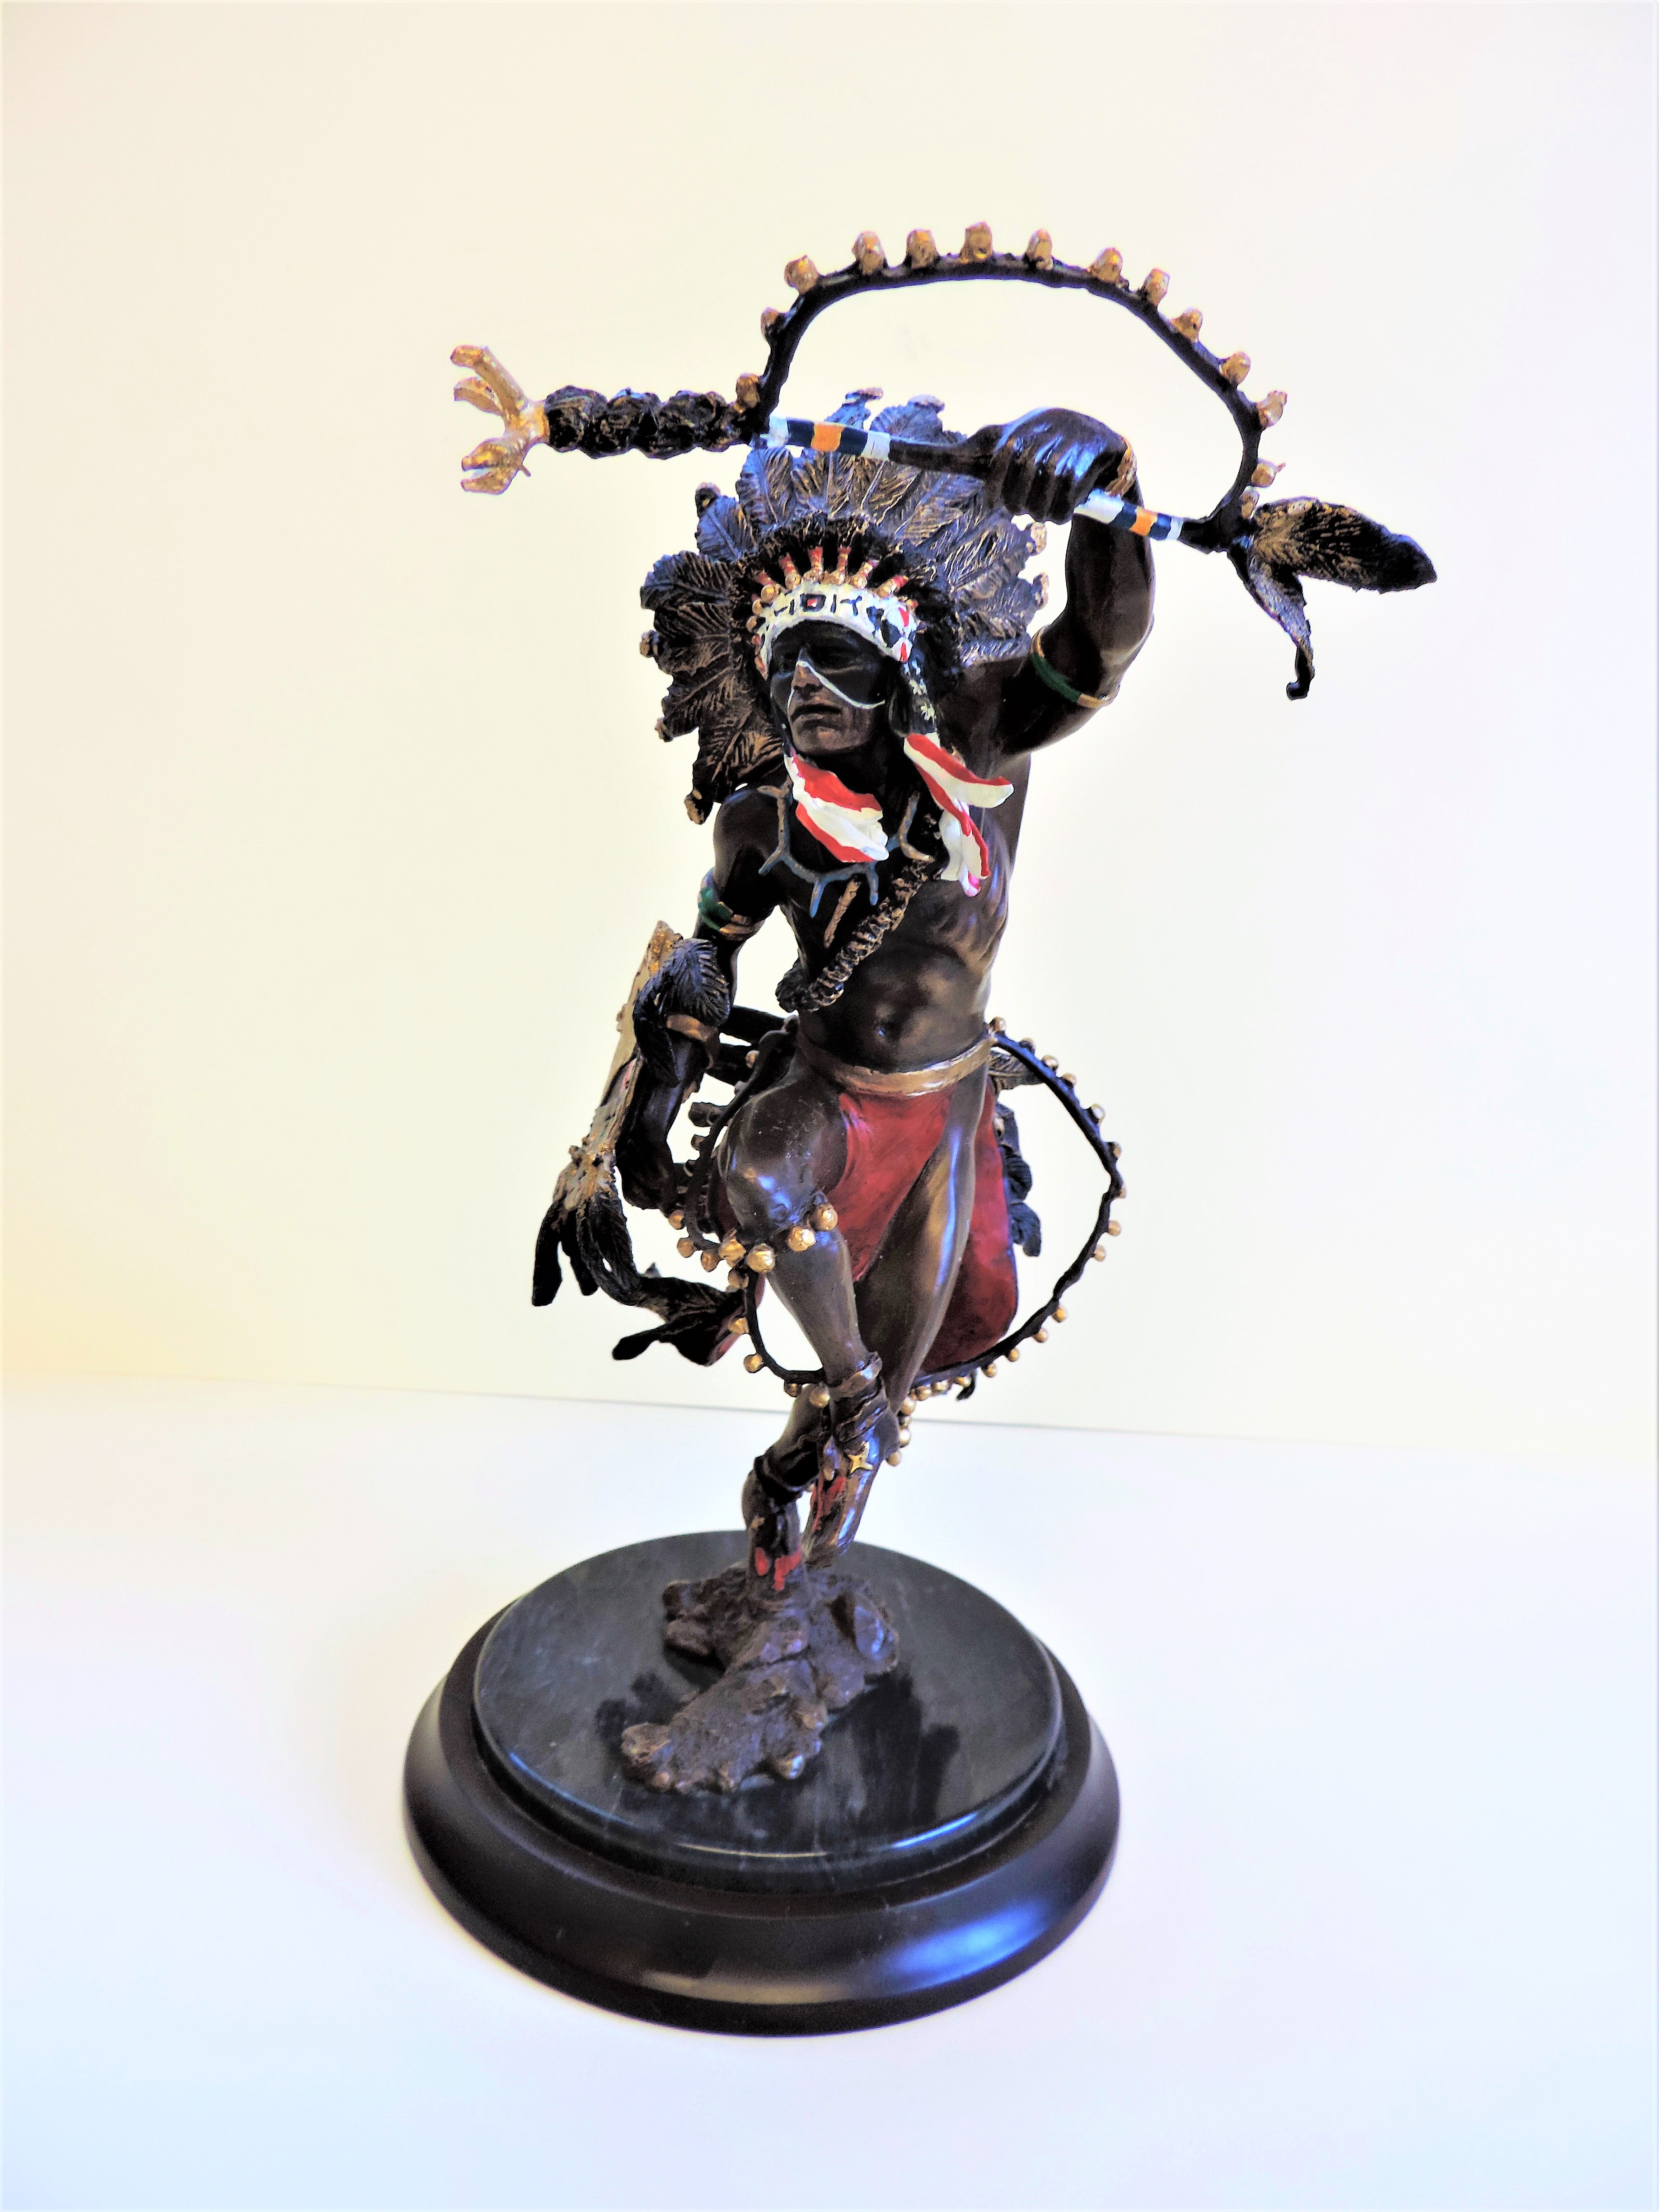 Signed Limited Edition Bronze Sculpture 'Spirit Of The Thunderbird' Franklin Mint - Image 3 of 15